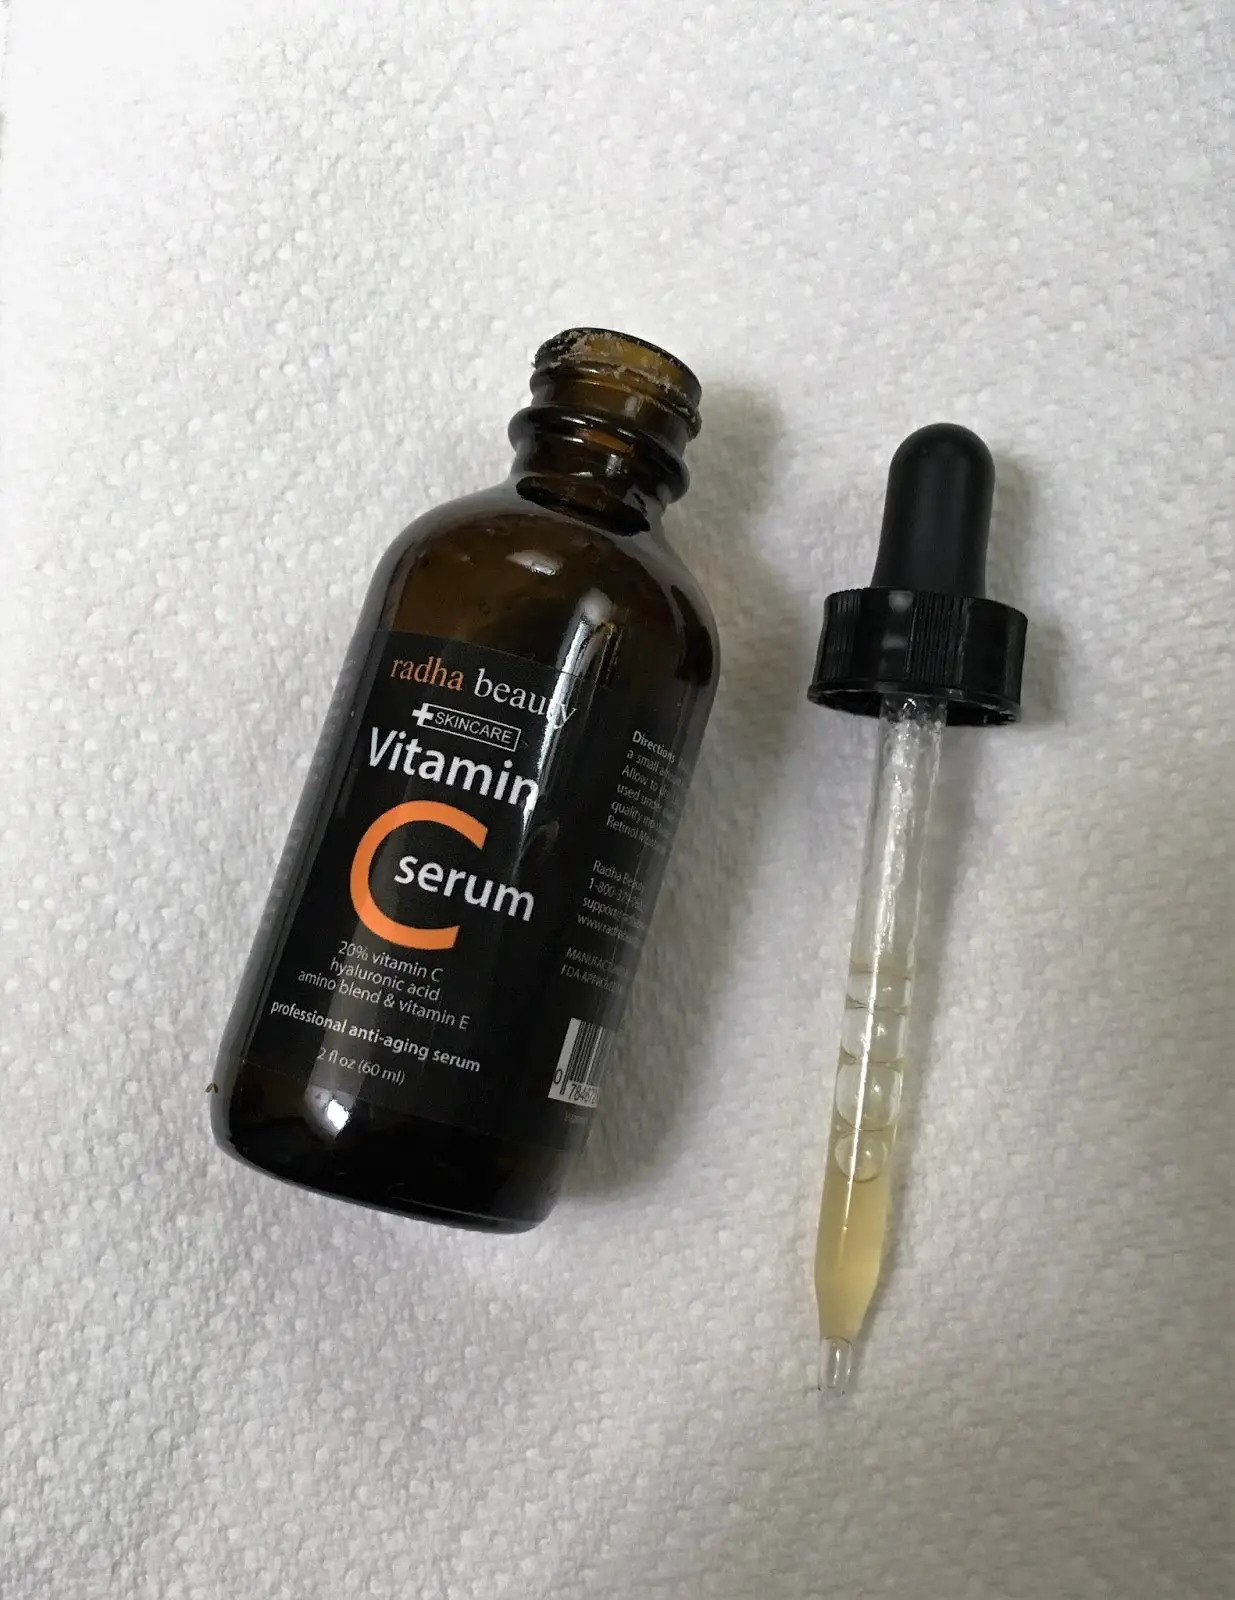 Oxidized Vitamin C serums, to use or not to use?